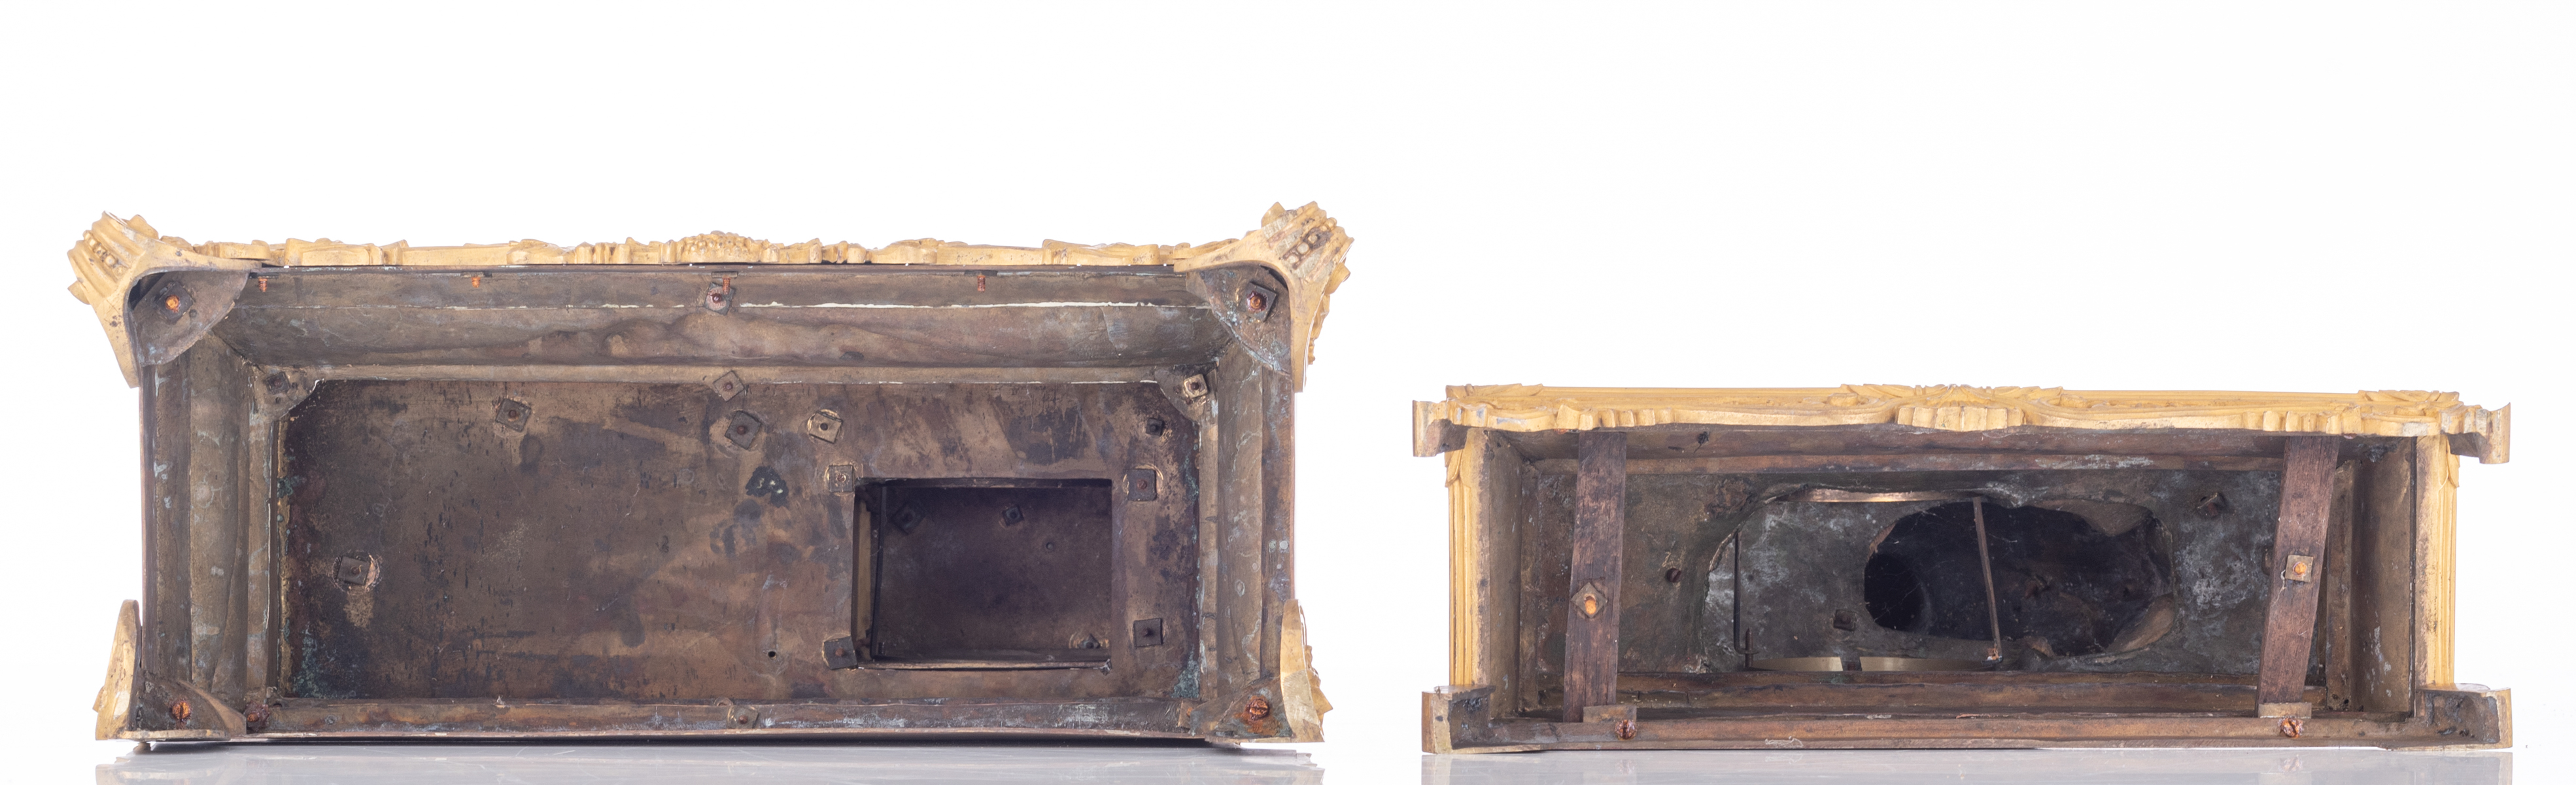 Two gilt bronze French Restauration period mantle clocks, with sitting beauties on top, both with mi - Image 5 of 5